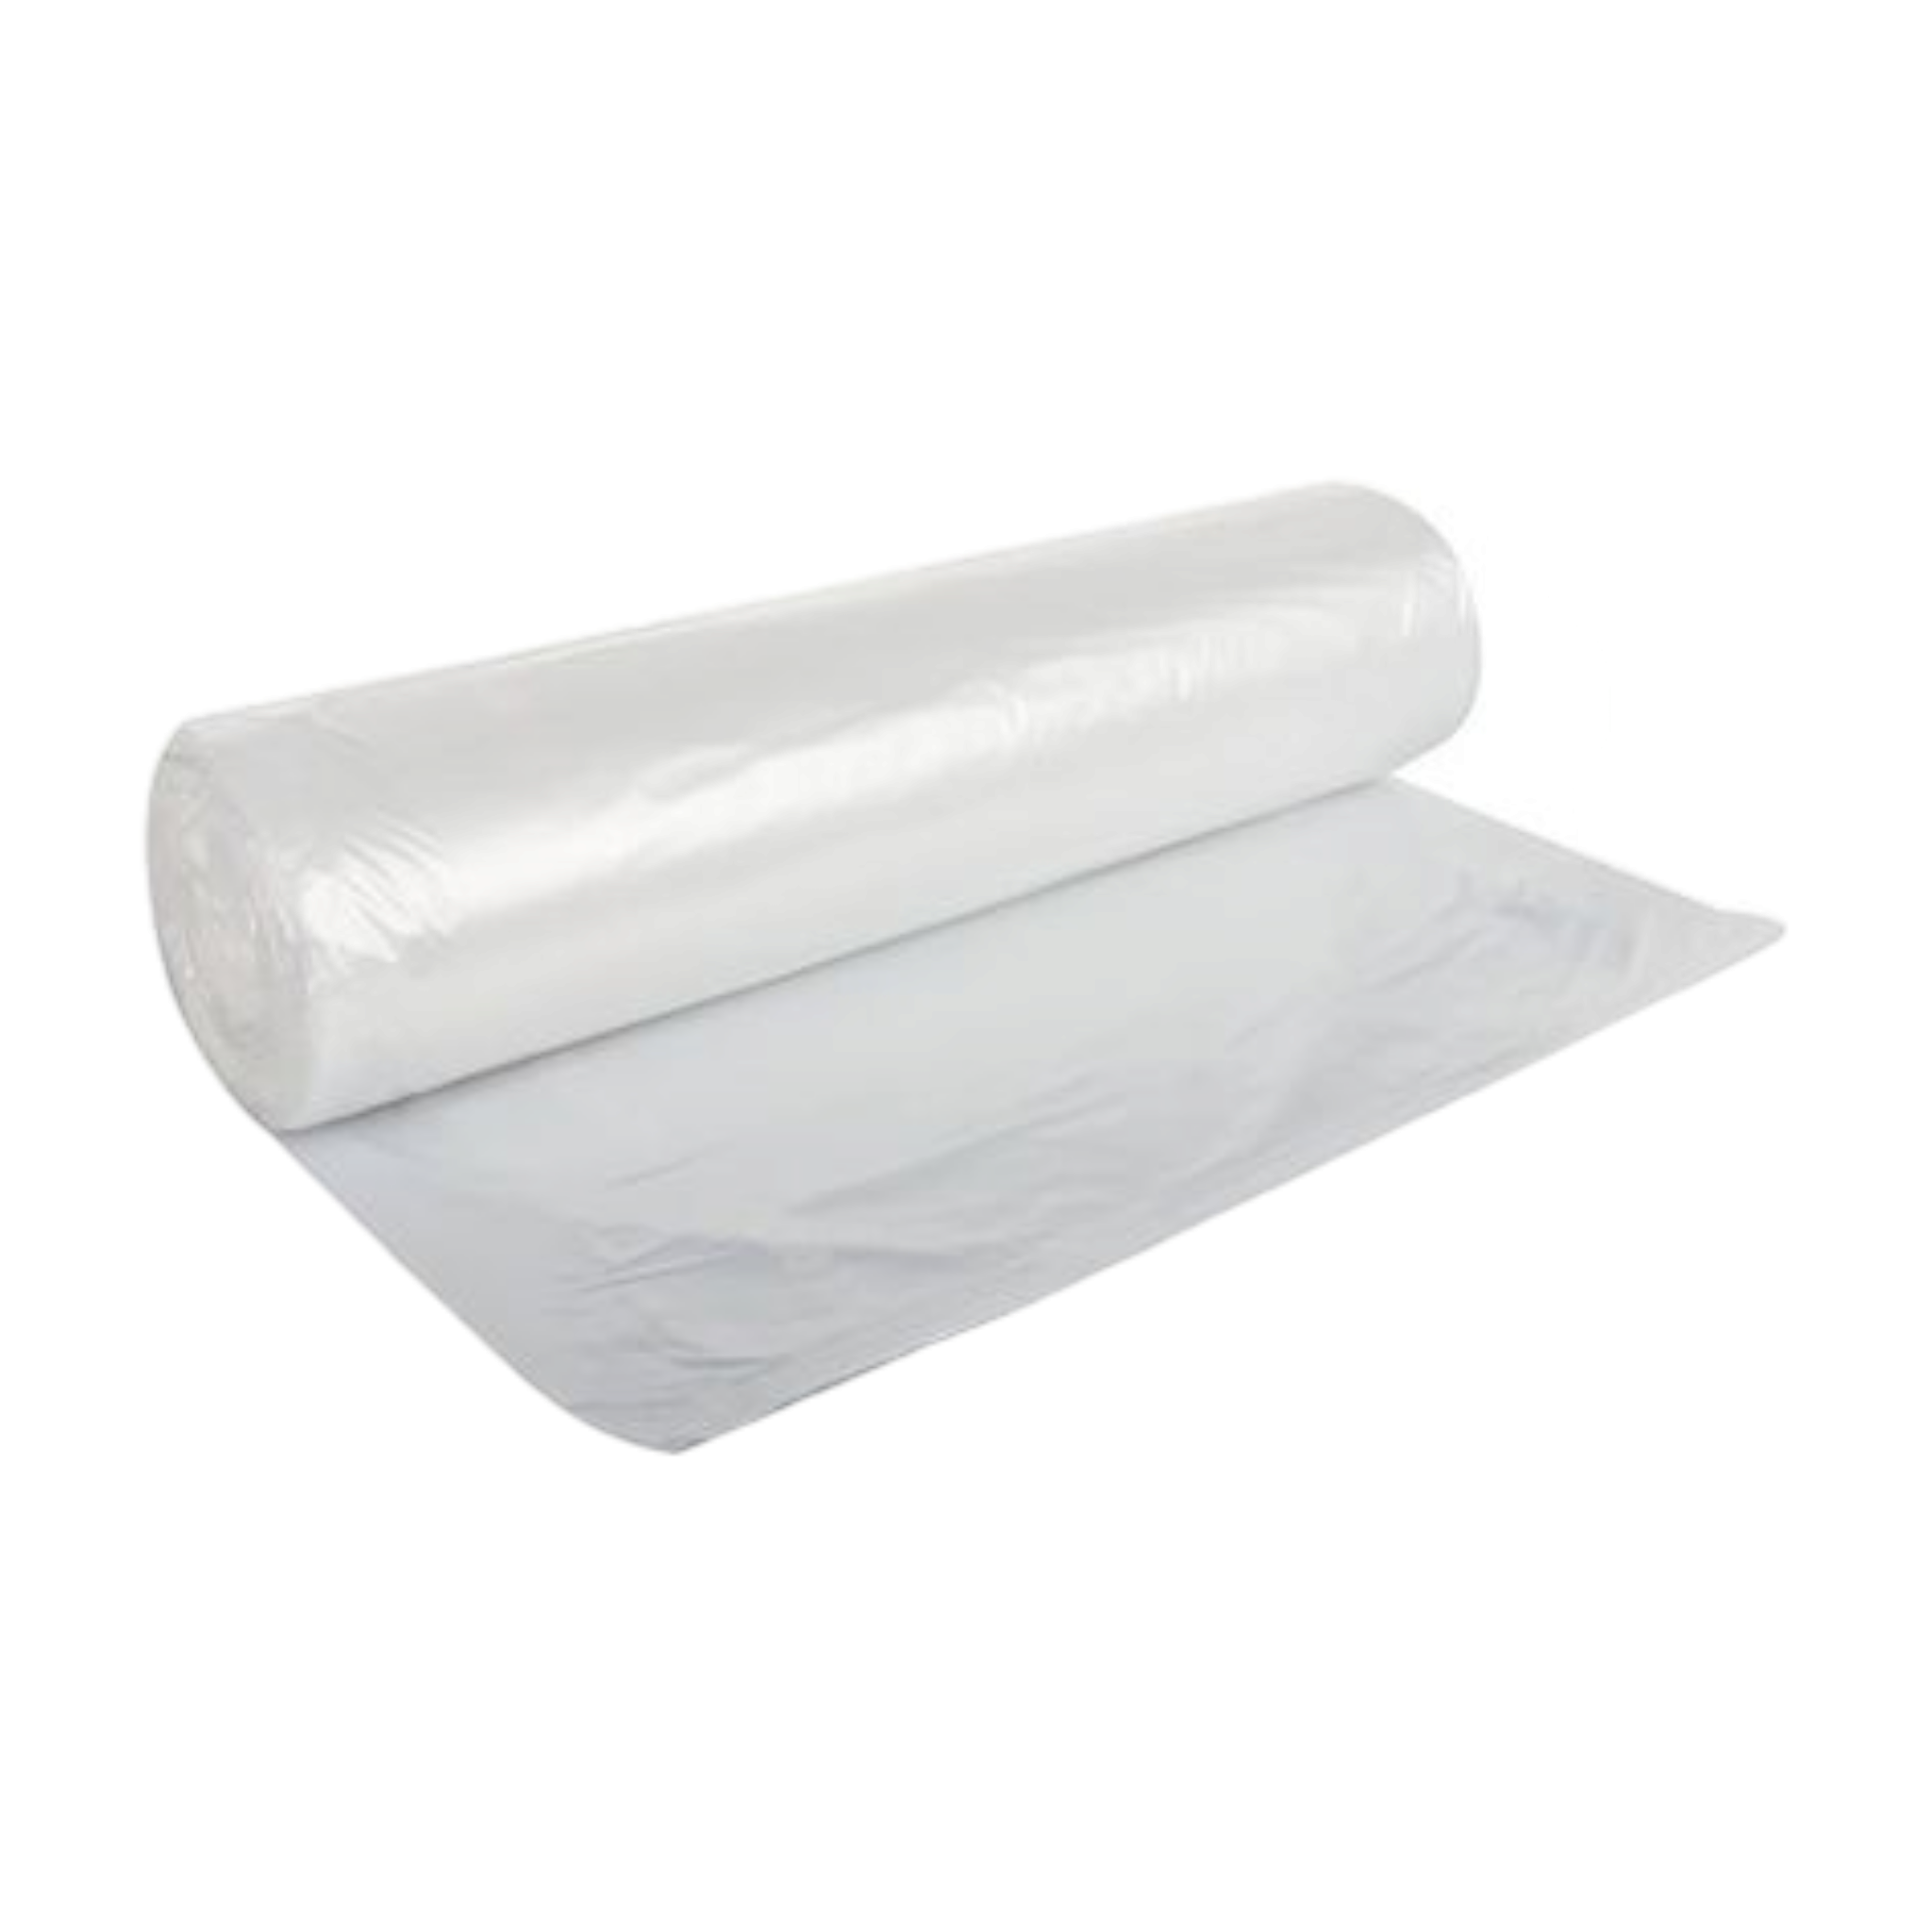 Disa Refuse Bags on Roll Clear 75x95cm 15pcs